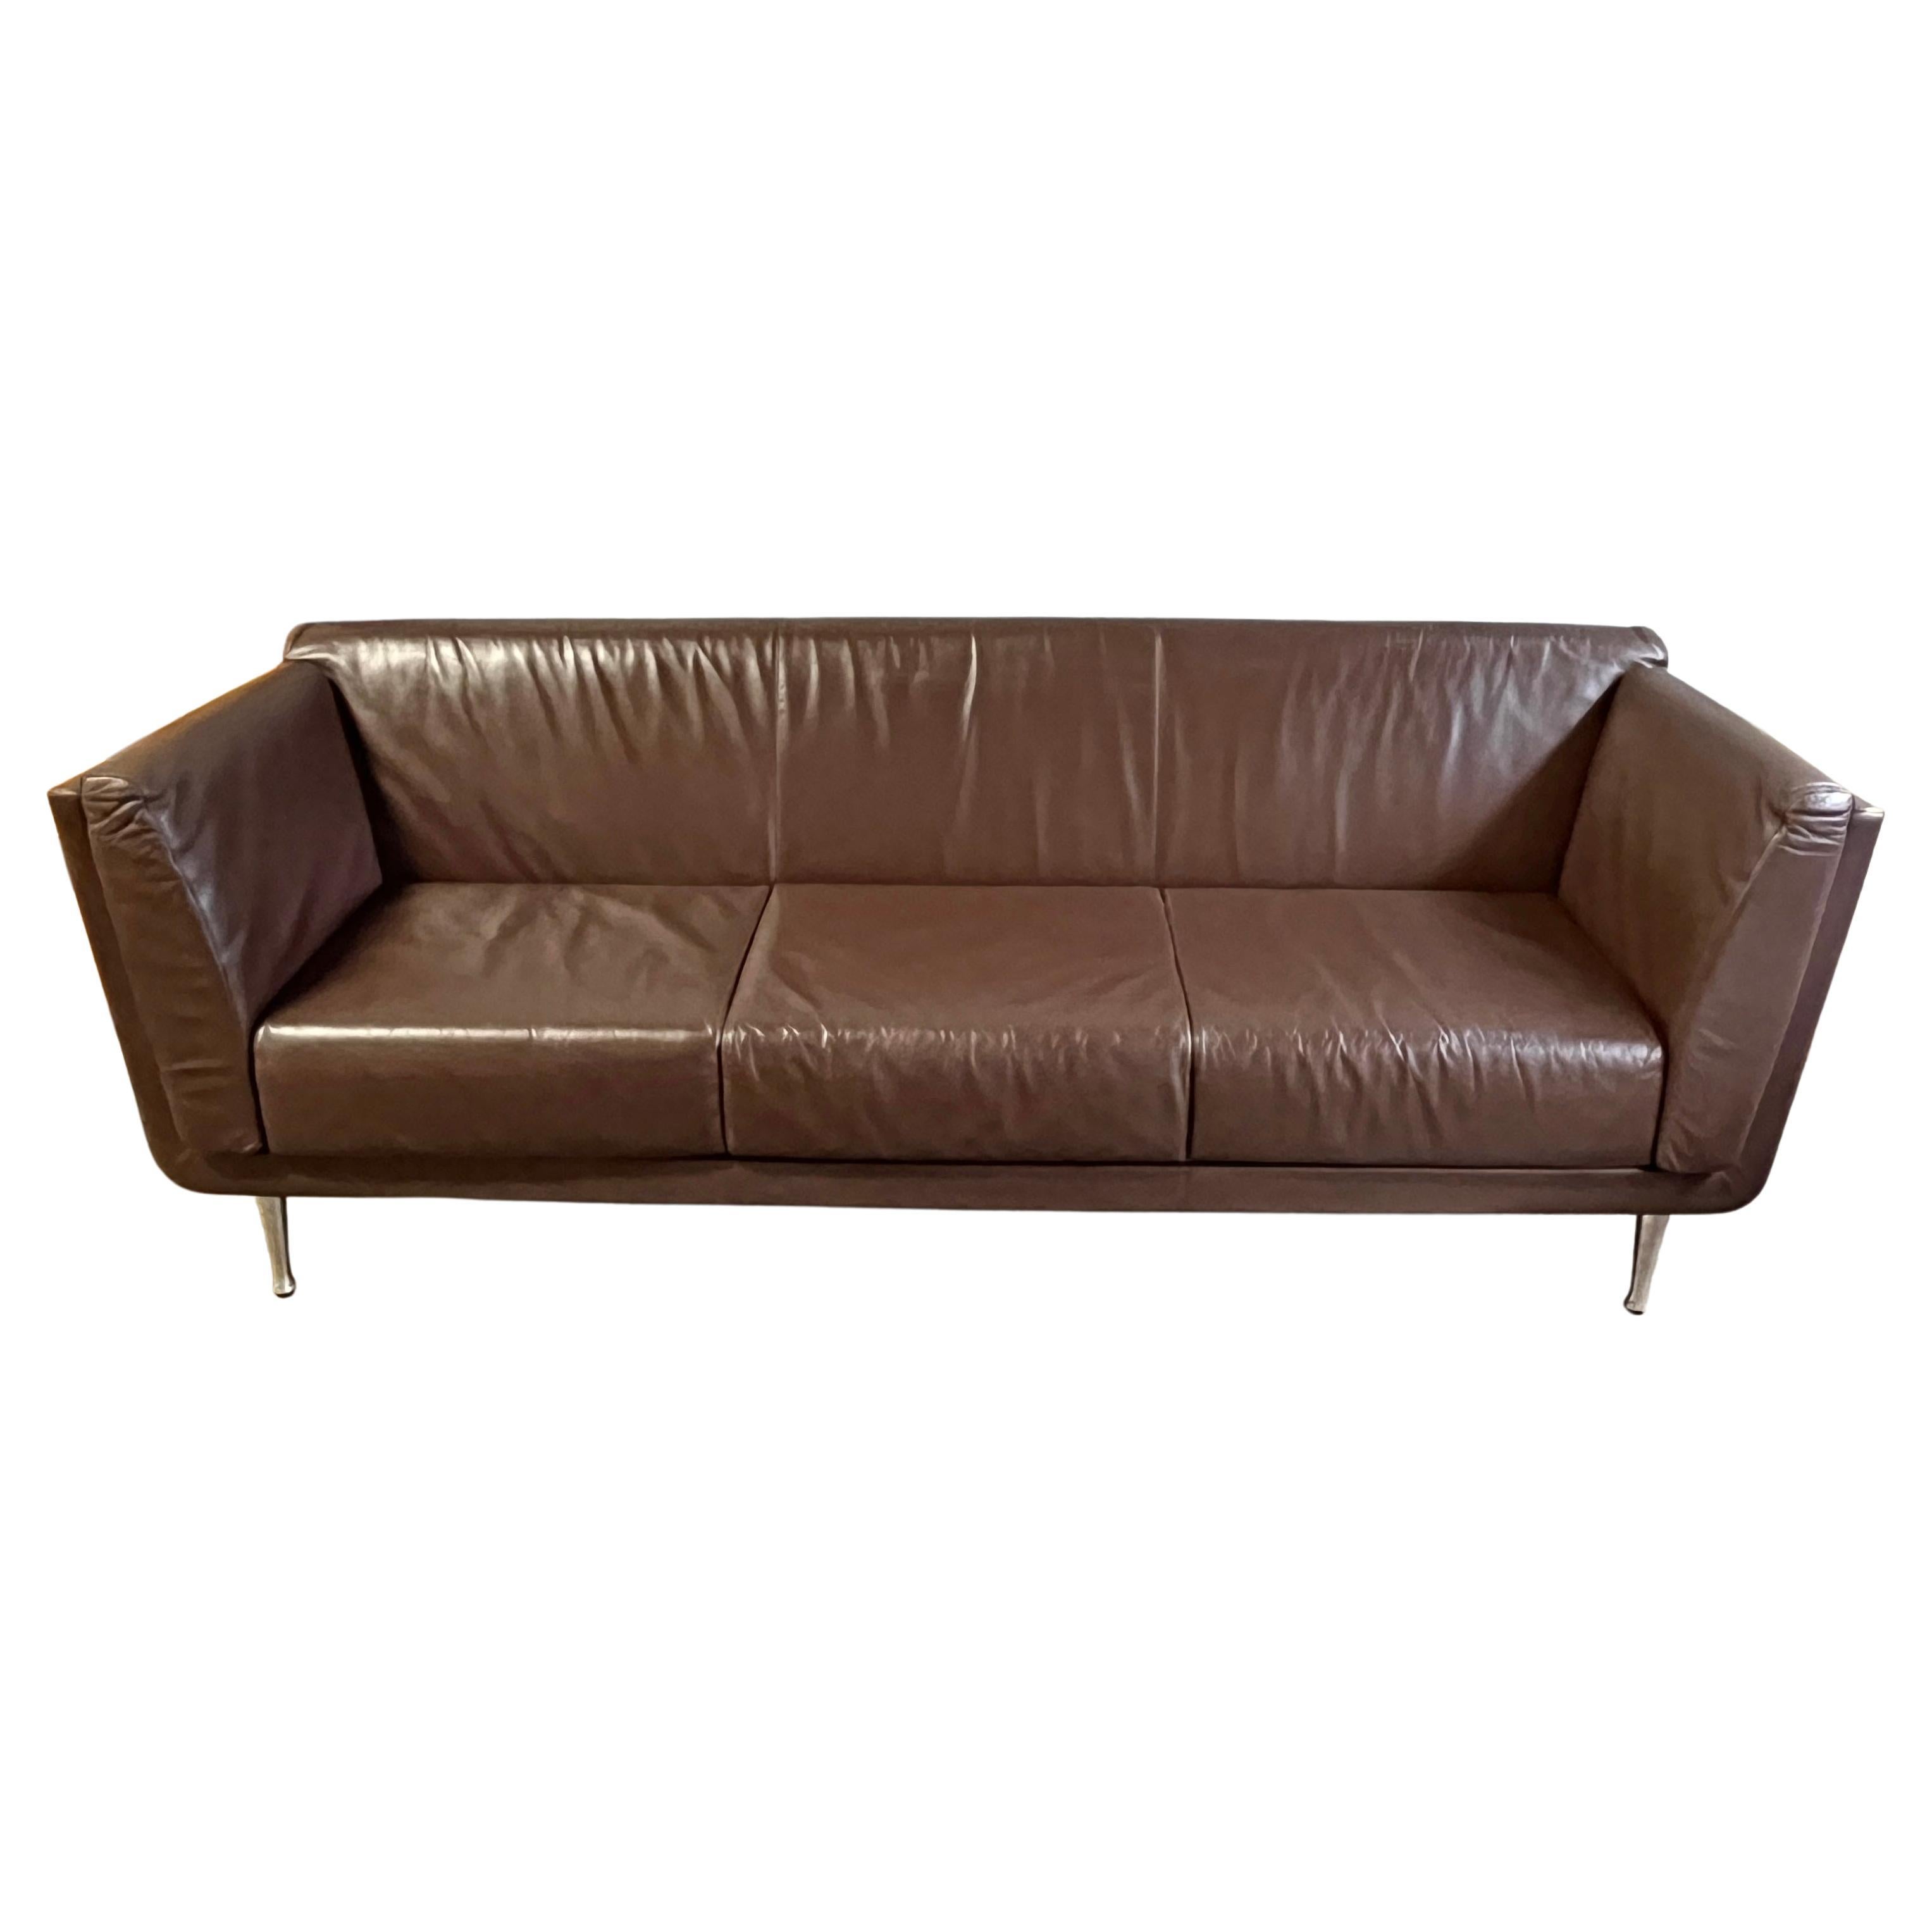 Pictures taken outside on an overcast day and inside. The color brown is more correct in the darker tone. 
This incredible 'Goetz Sofa' by Mark Goetz for Herman Miller features a walnut/cherry case, quality brown leather cushions, and aluminum legs.